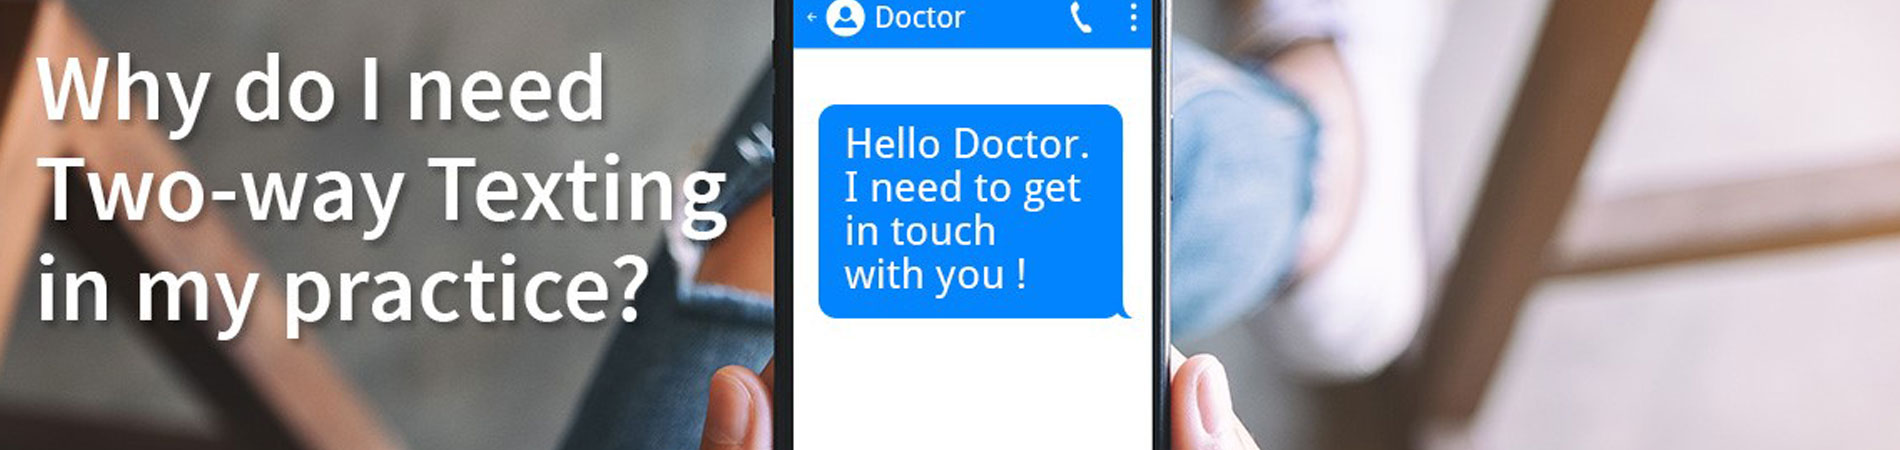 Why do I need two-way texting in my practice?